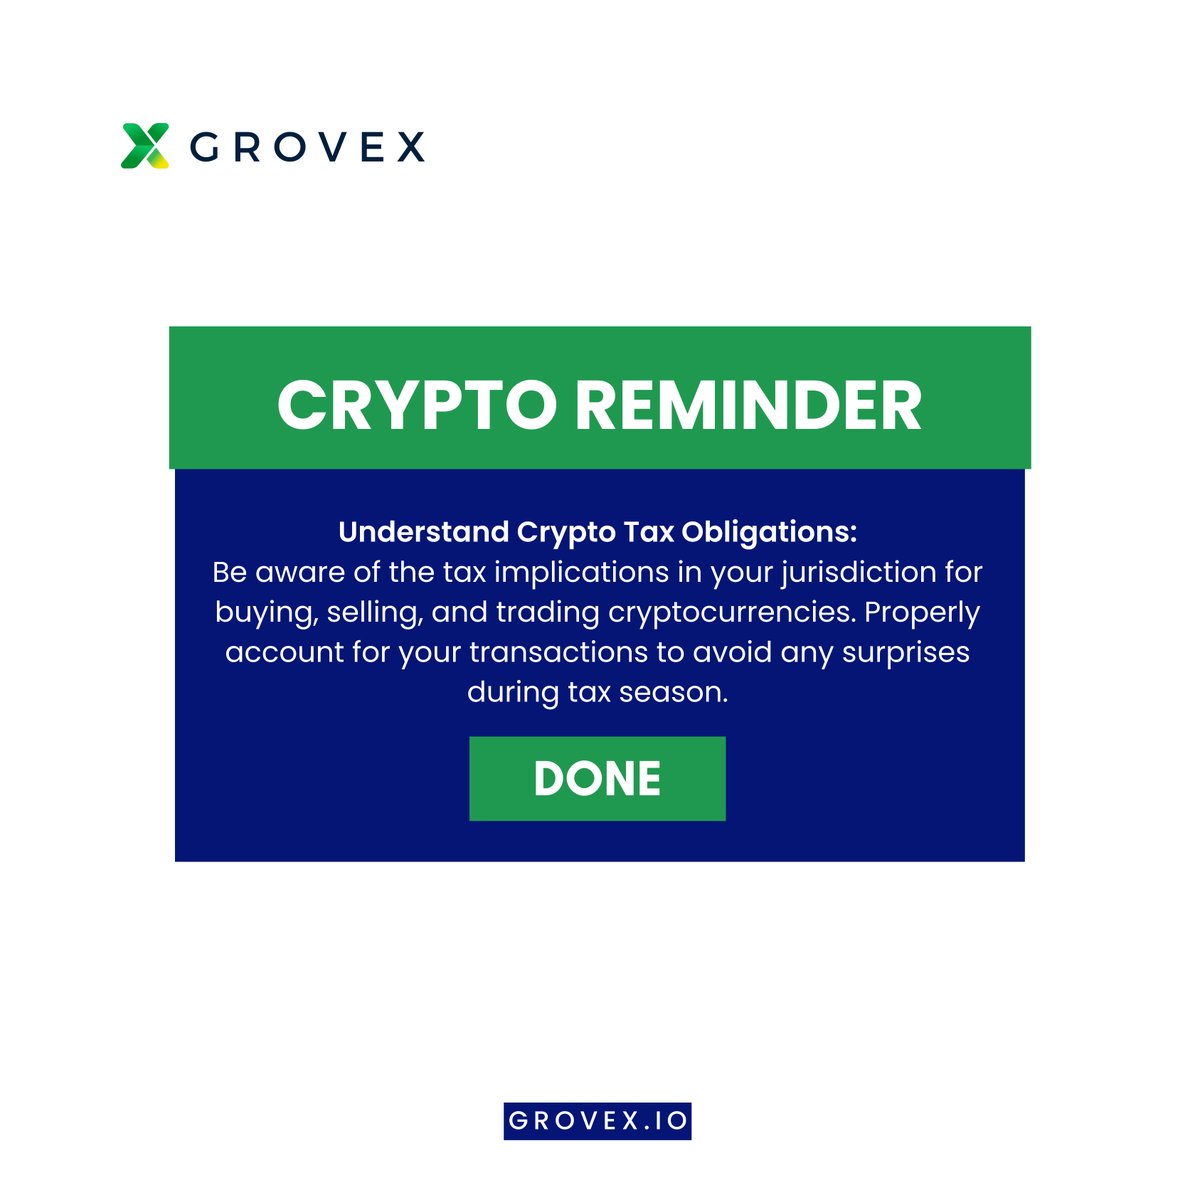 🚨 Crypto Tip: Always be aware of the tax implications in your jurisdiction when trading cryptocurrencies. Keep accurate records of all transactions to avoid surprises during tax season. Stay informed, trade smart! 📊 #CryptoTaxTips #GroveX